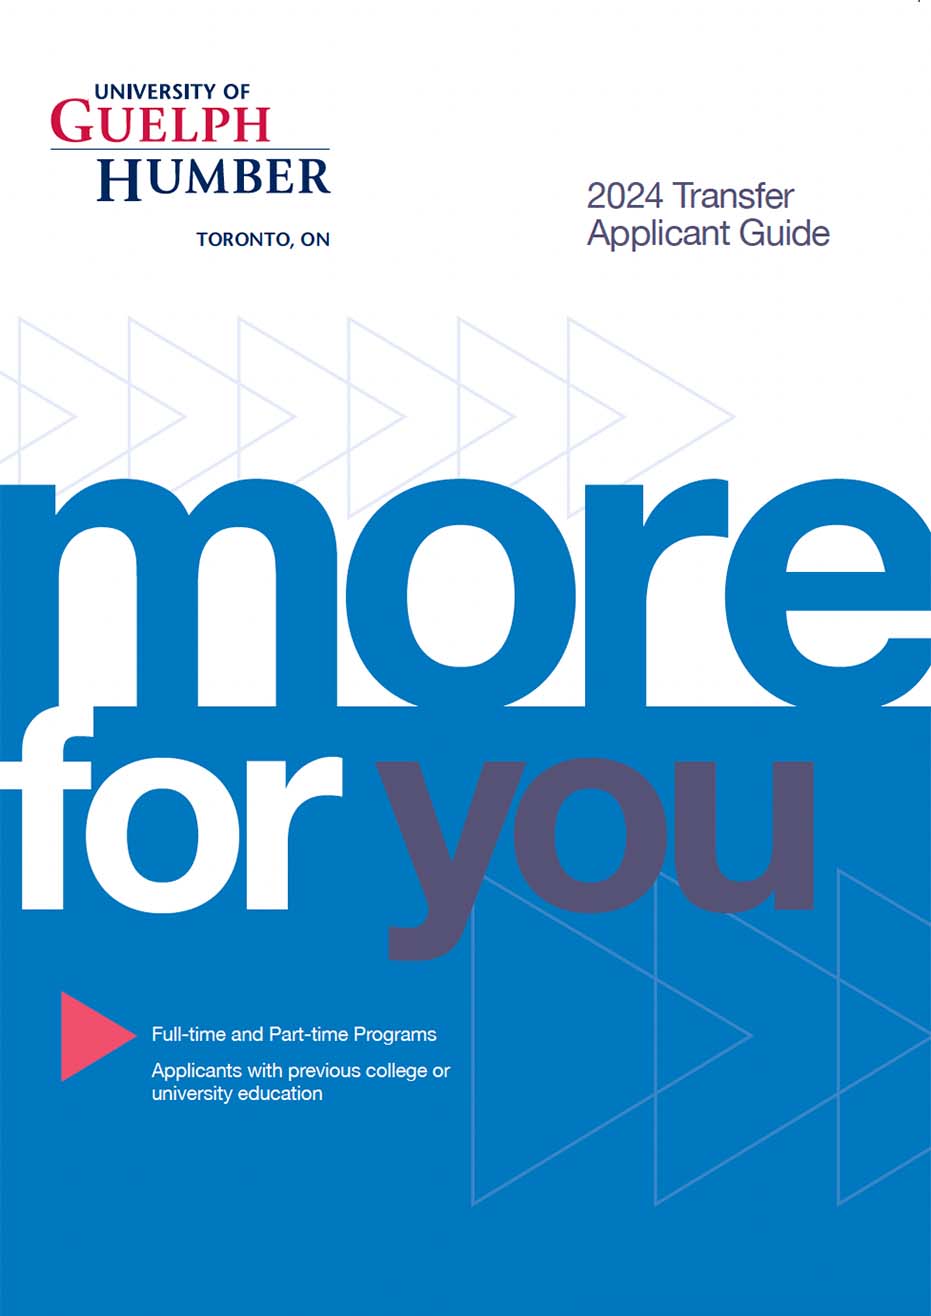 Cover page of Transfer Applicant Guide